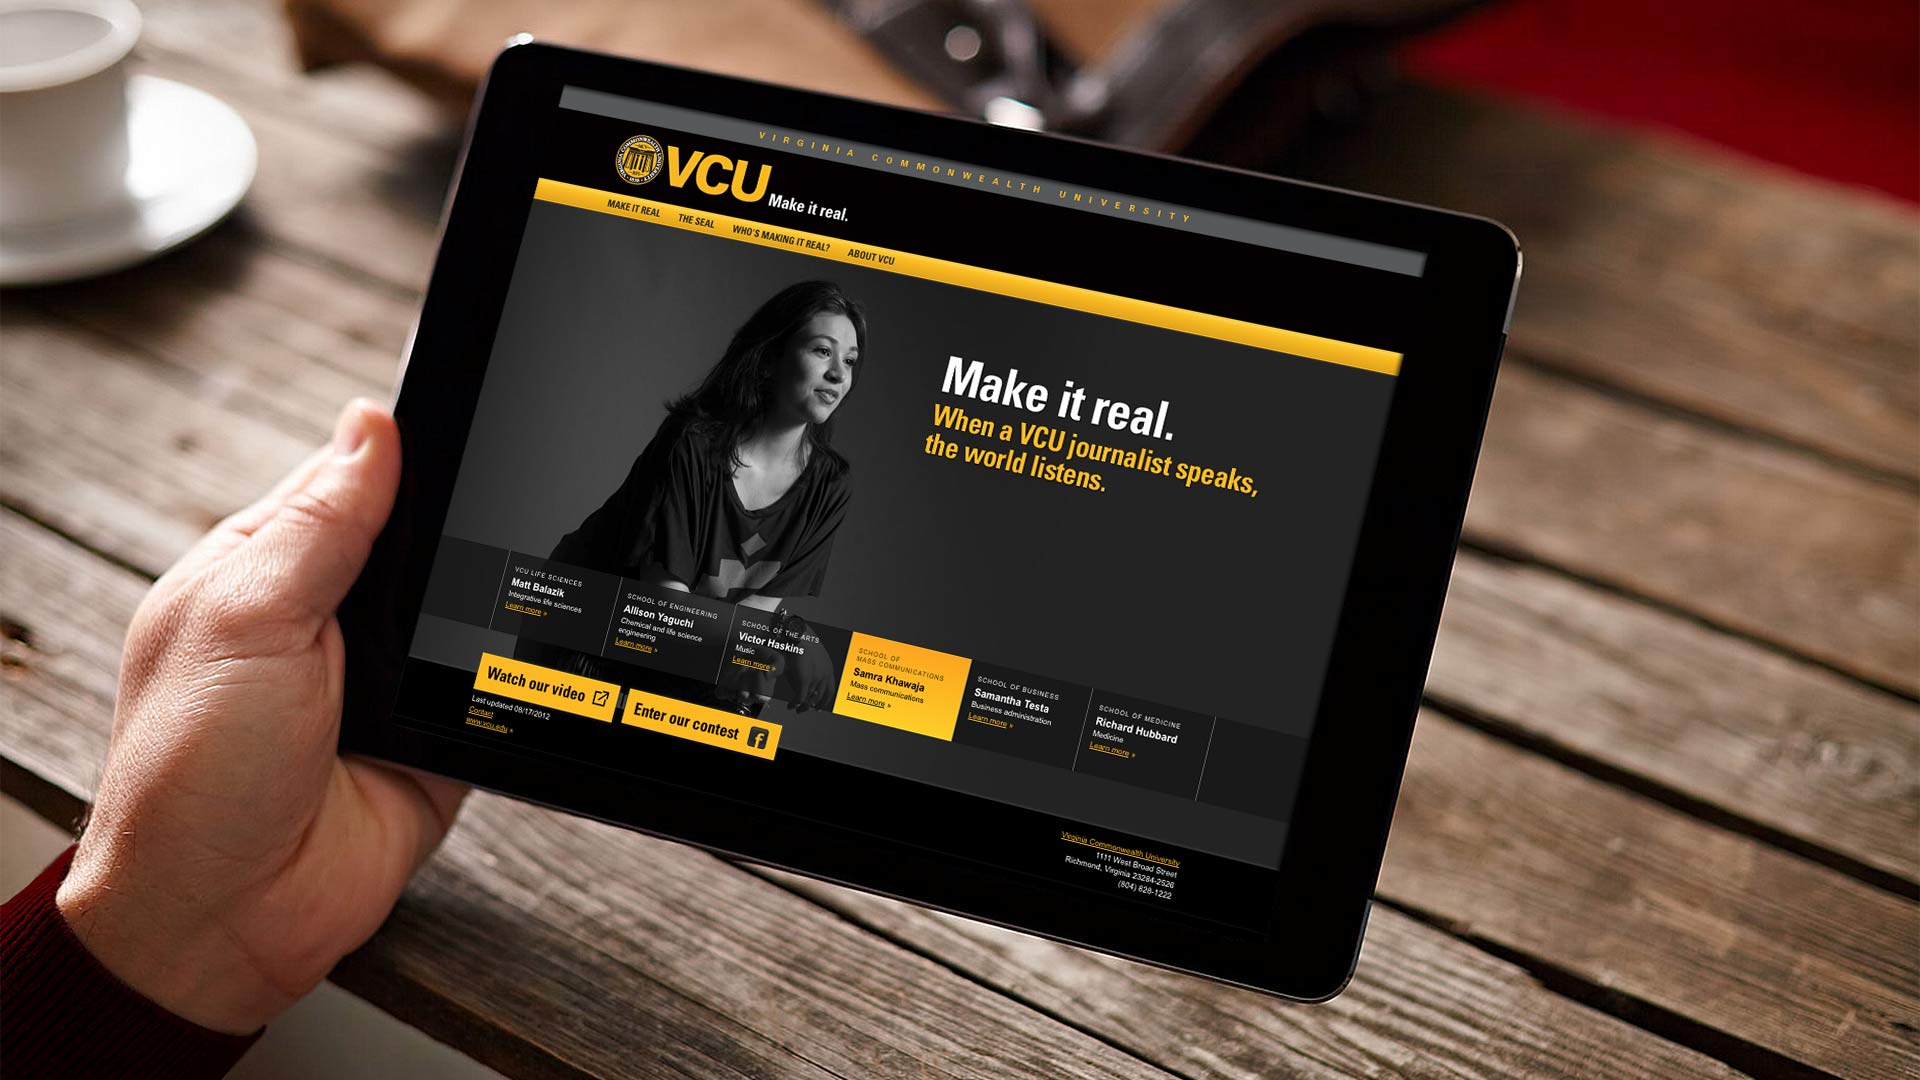 An ipad with the VCU website pulled up